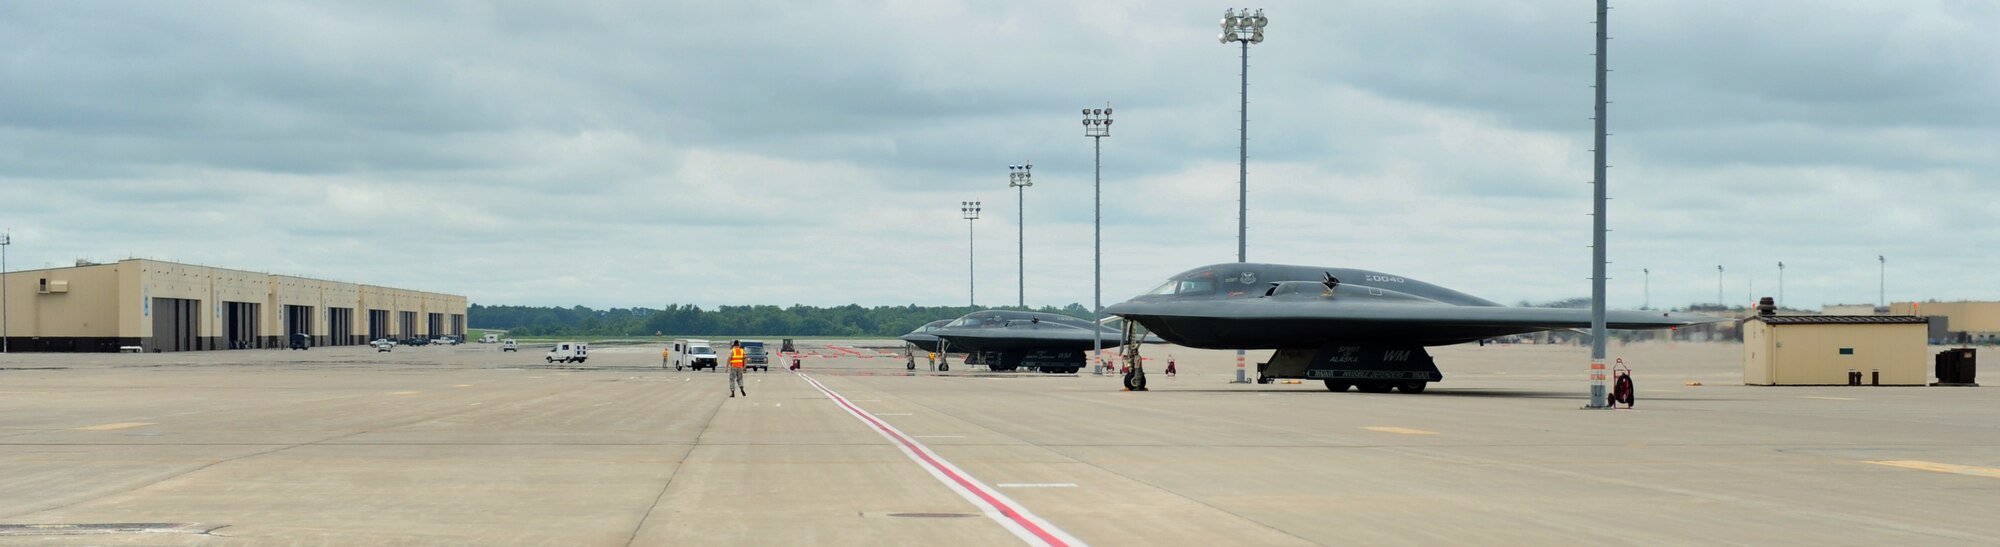 Three B-2 Spirits prepare to taxi at Whiteman Air Force Base, Mo., July 10, 2015. Three dedicated crew chiefs were awarded with incentive flights for being named Crew Chiefs of the Year at the group and MAJCOM levels. (U.S. Air Force photo by Senior Airman Joel Pfiester/Released)
